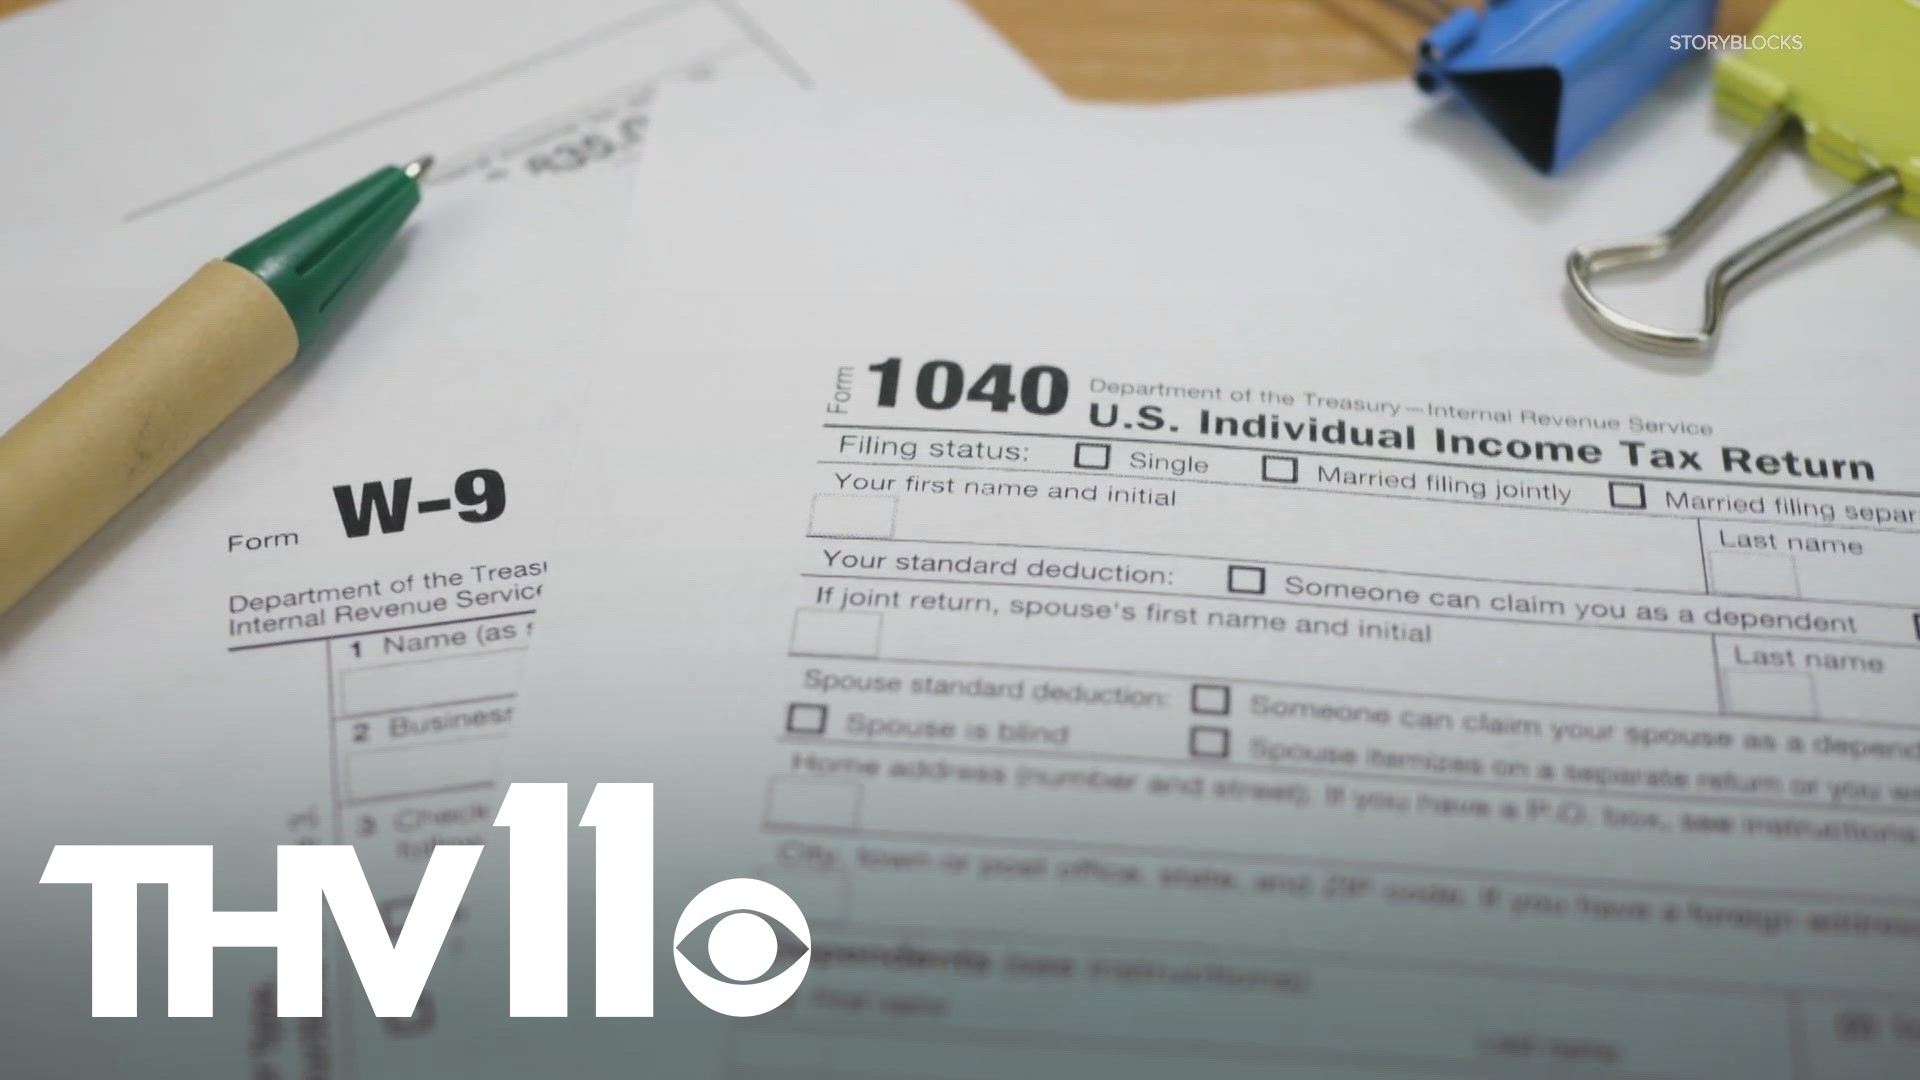 It's tax season, and many people are looking for the best way to file this year— but here are some ways to get them down without spending a dime.